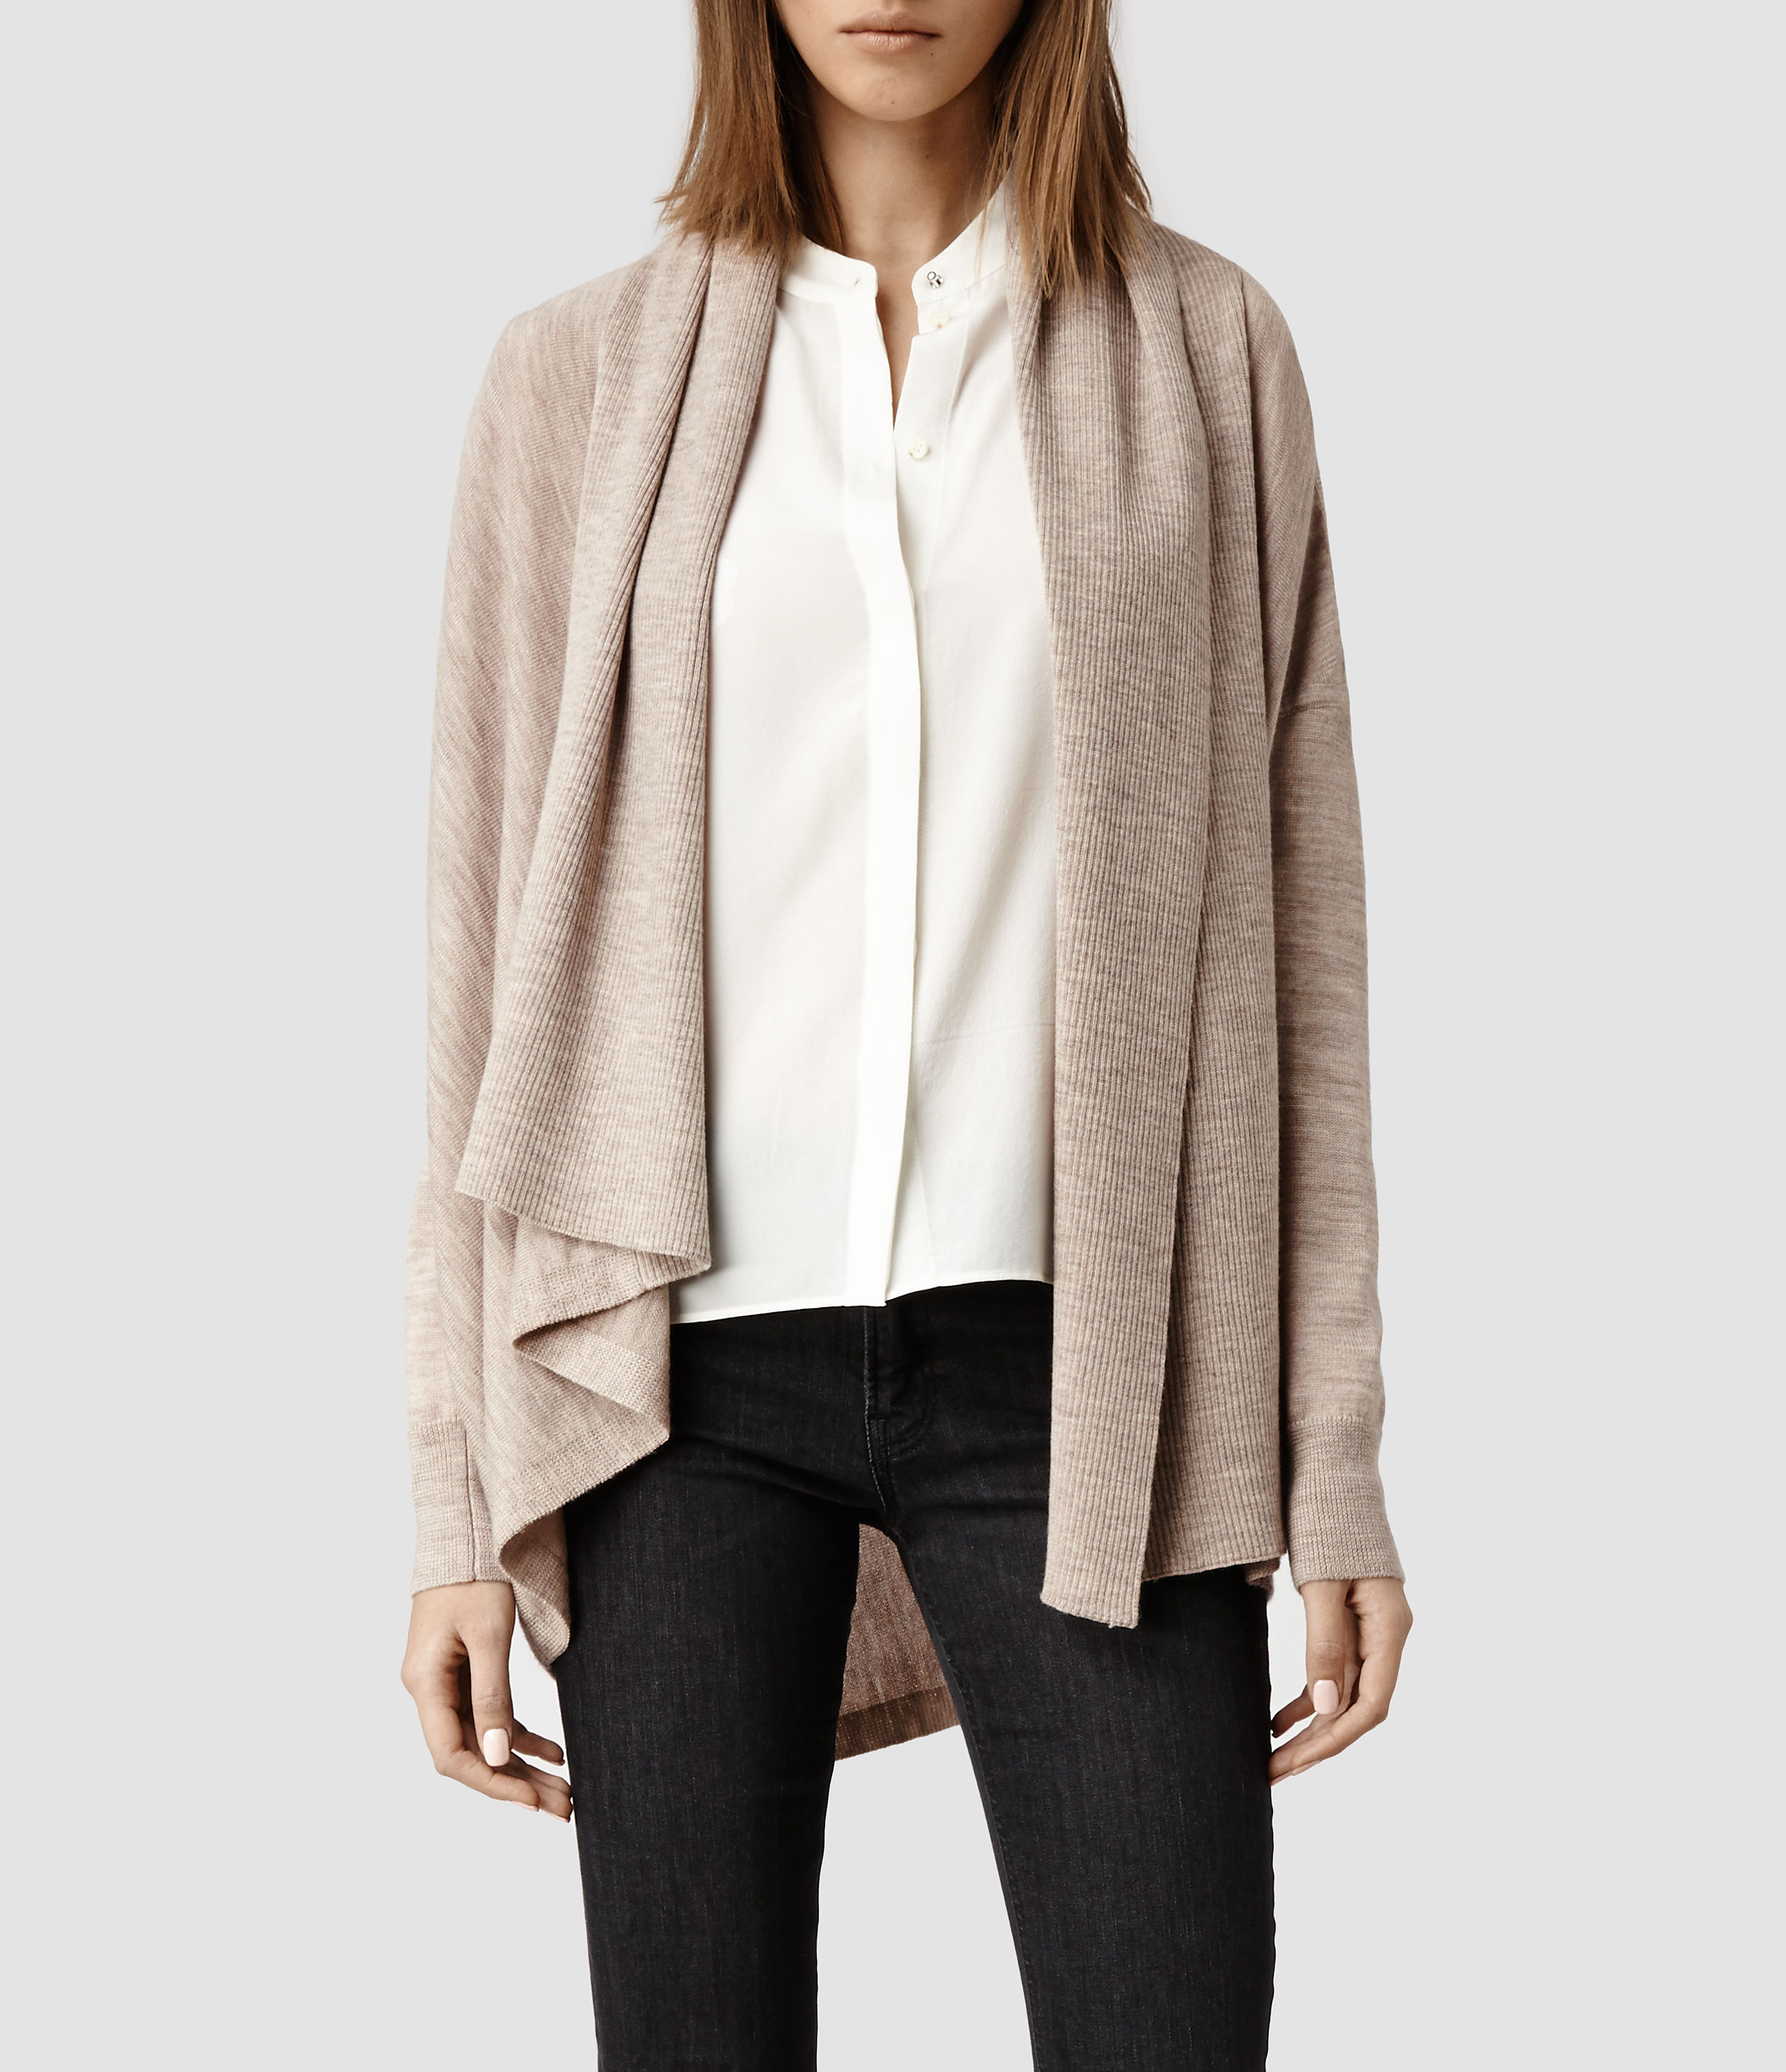 Lyst - Allsaints Awry Cardigan in Natural